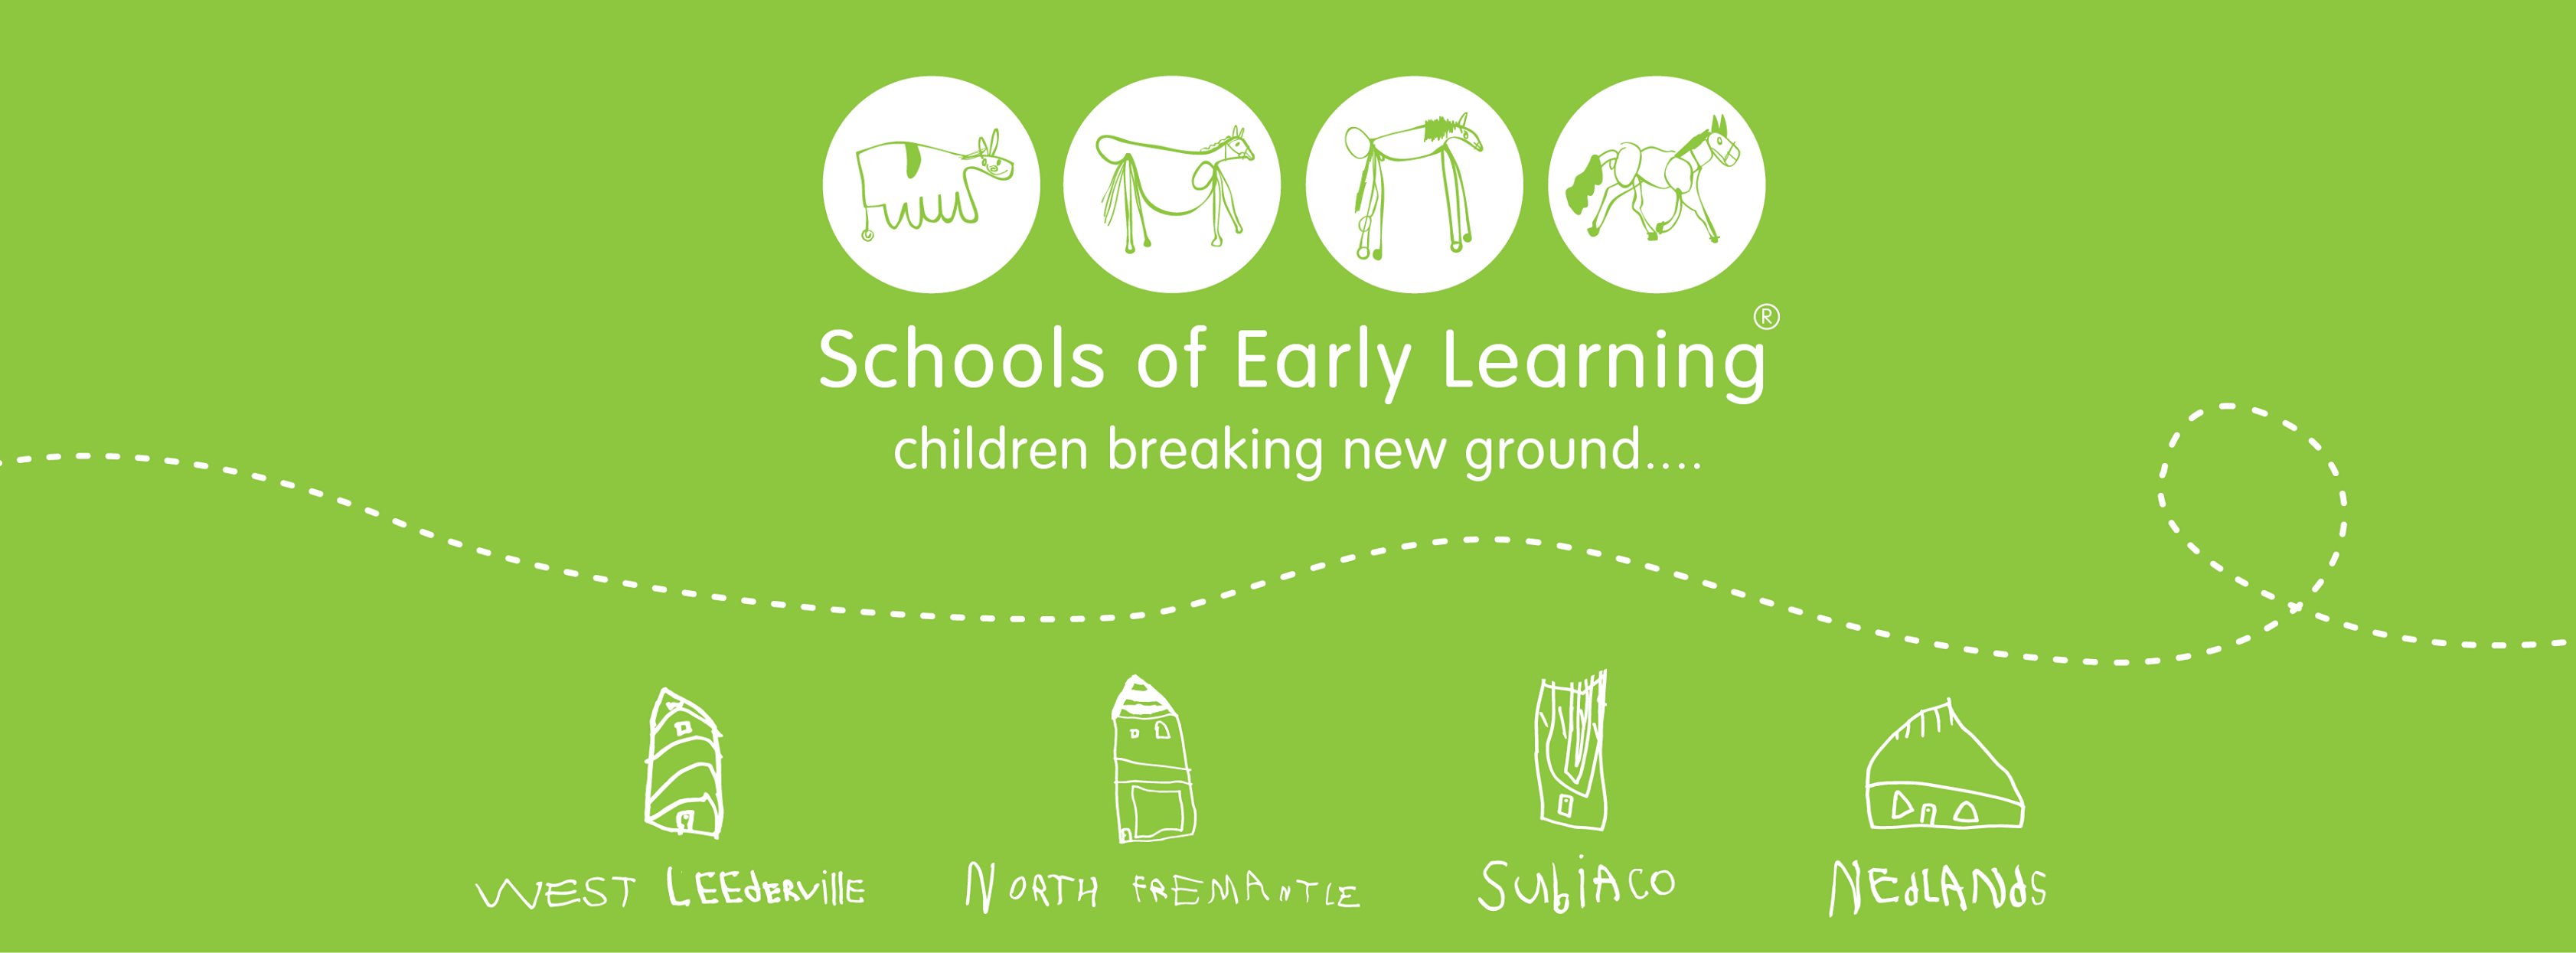 Schools of Early Learning Cover Image